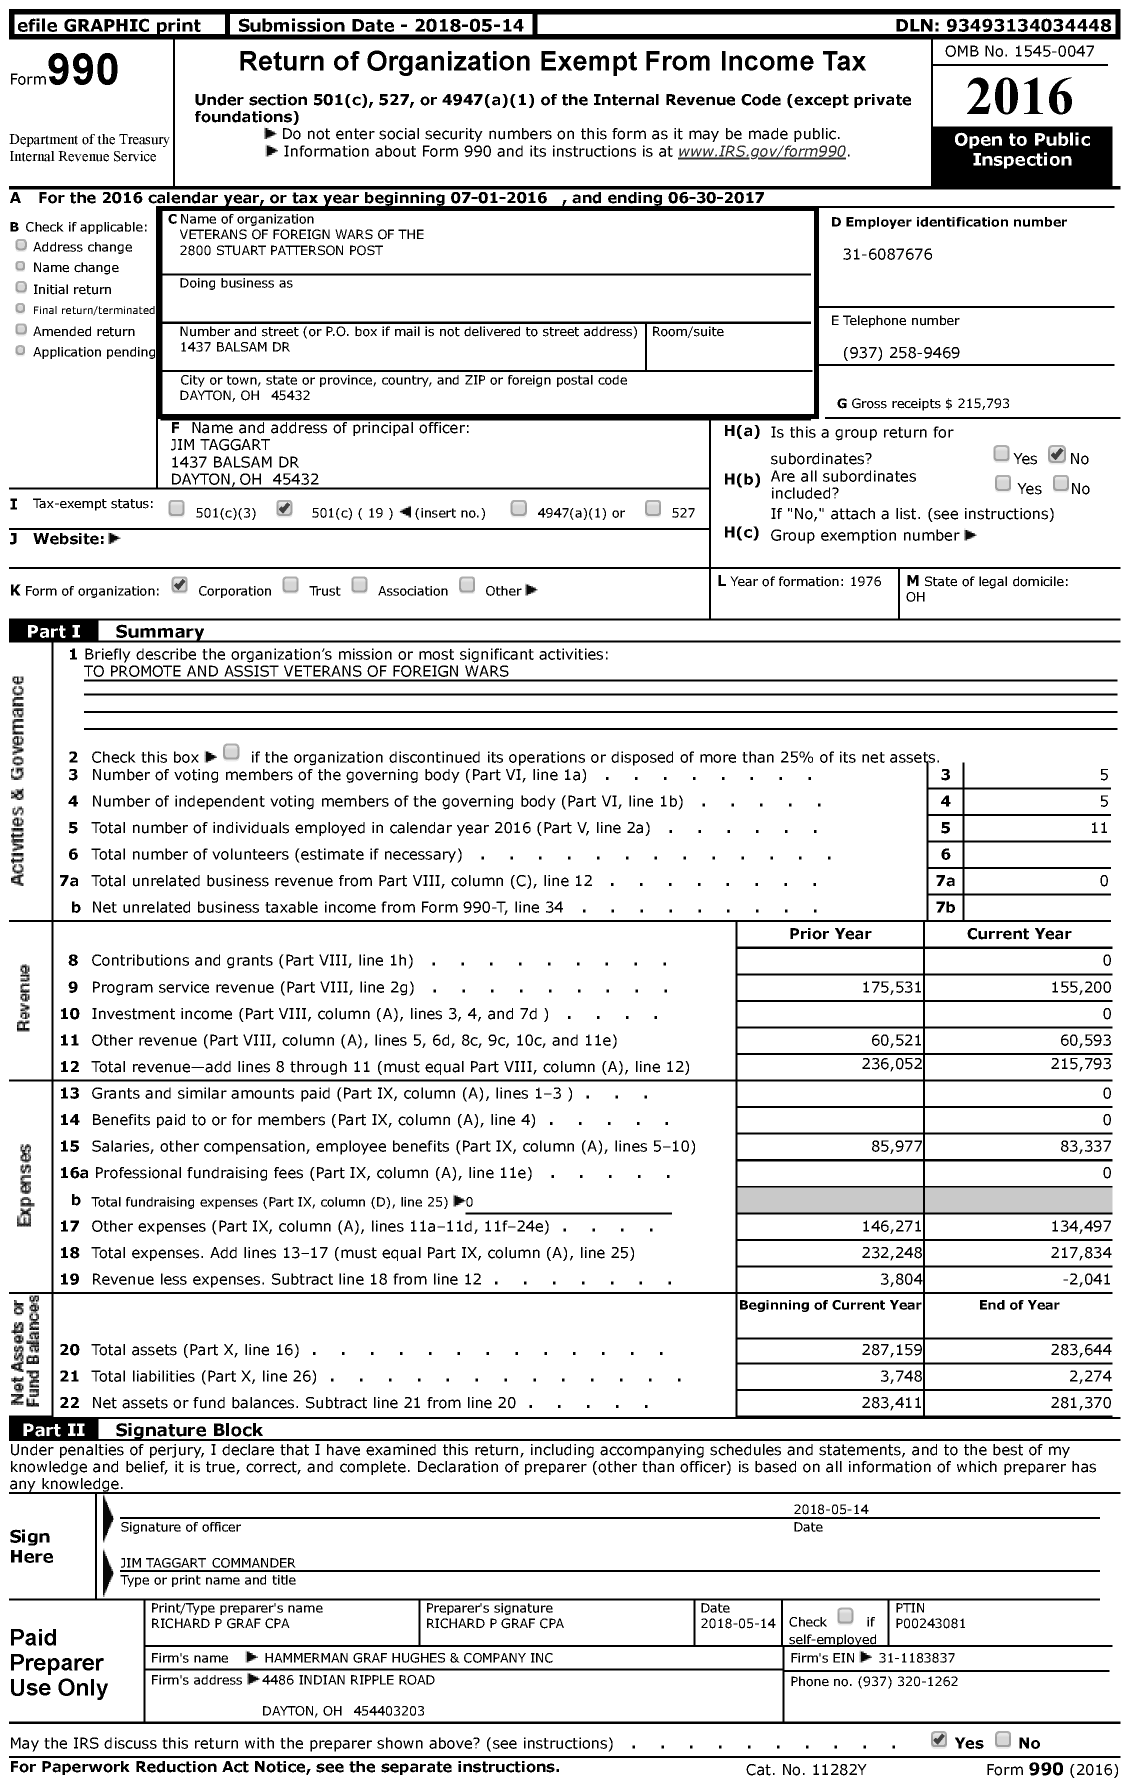 Image of first page of 2016 Form 990 for Ohio VFW - 2800 Stuart Patterson Post